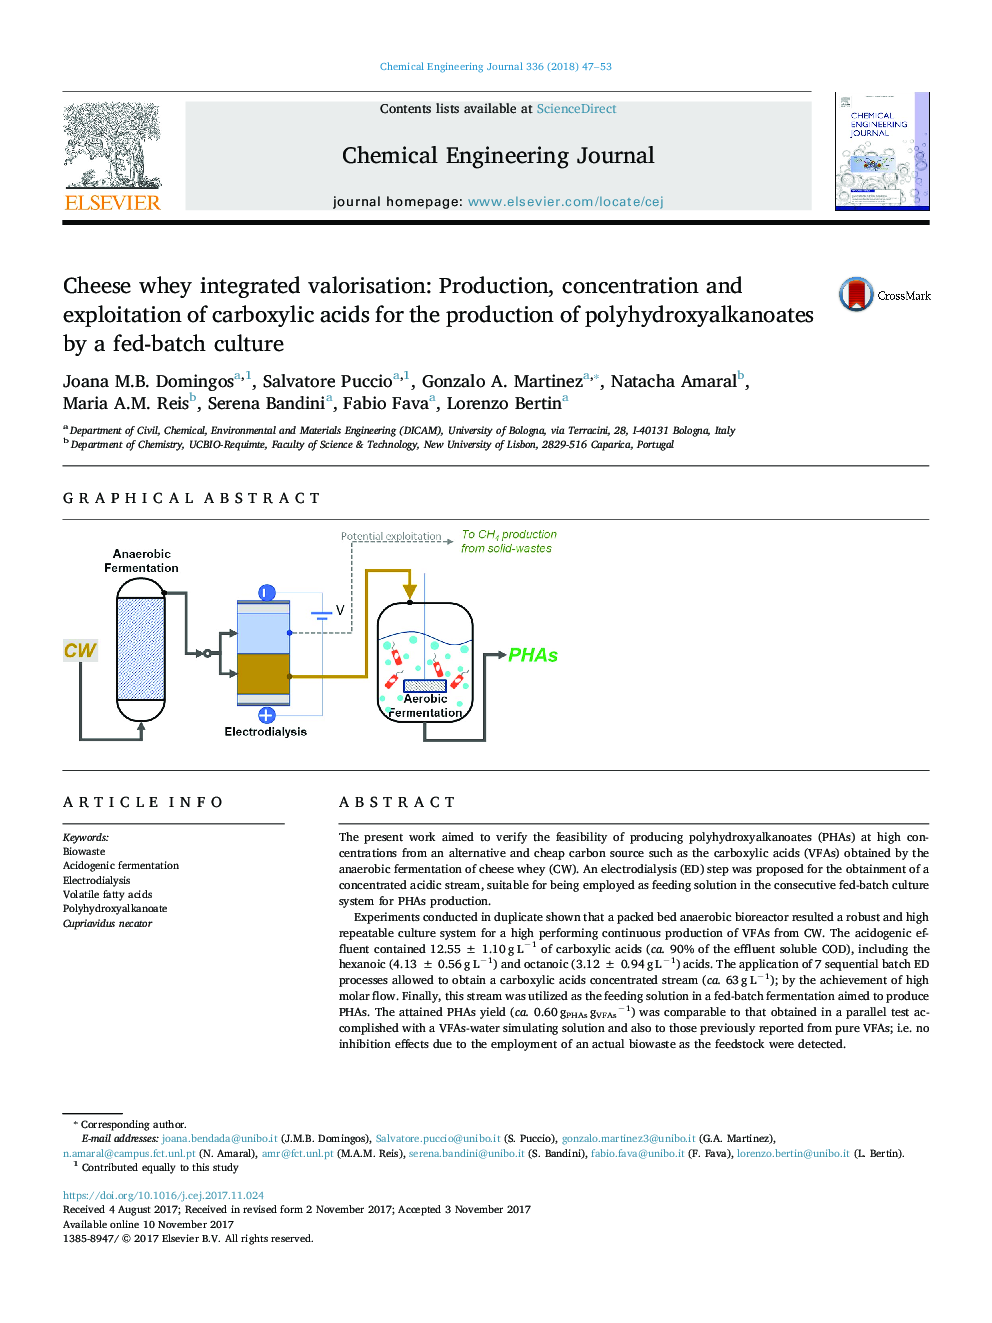 Cheese whey integrated valorisation: Production, concentration and exploitation of carboxylic acids for the production of polyhydroxyalkanoates by a fed-batch culture